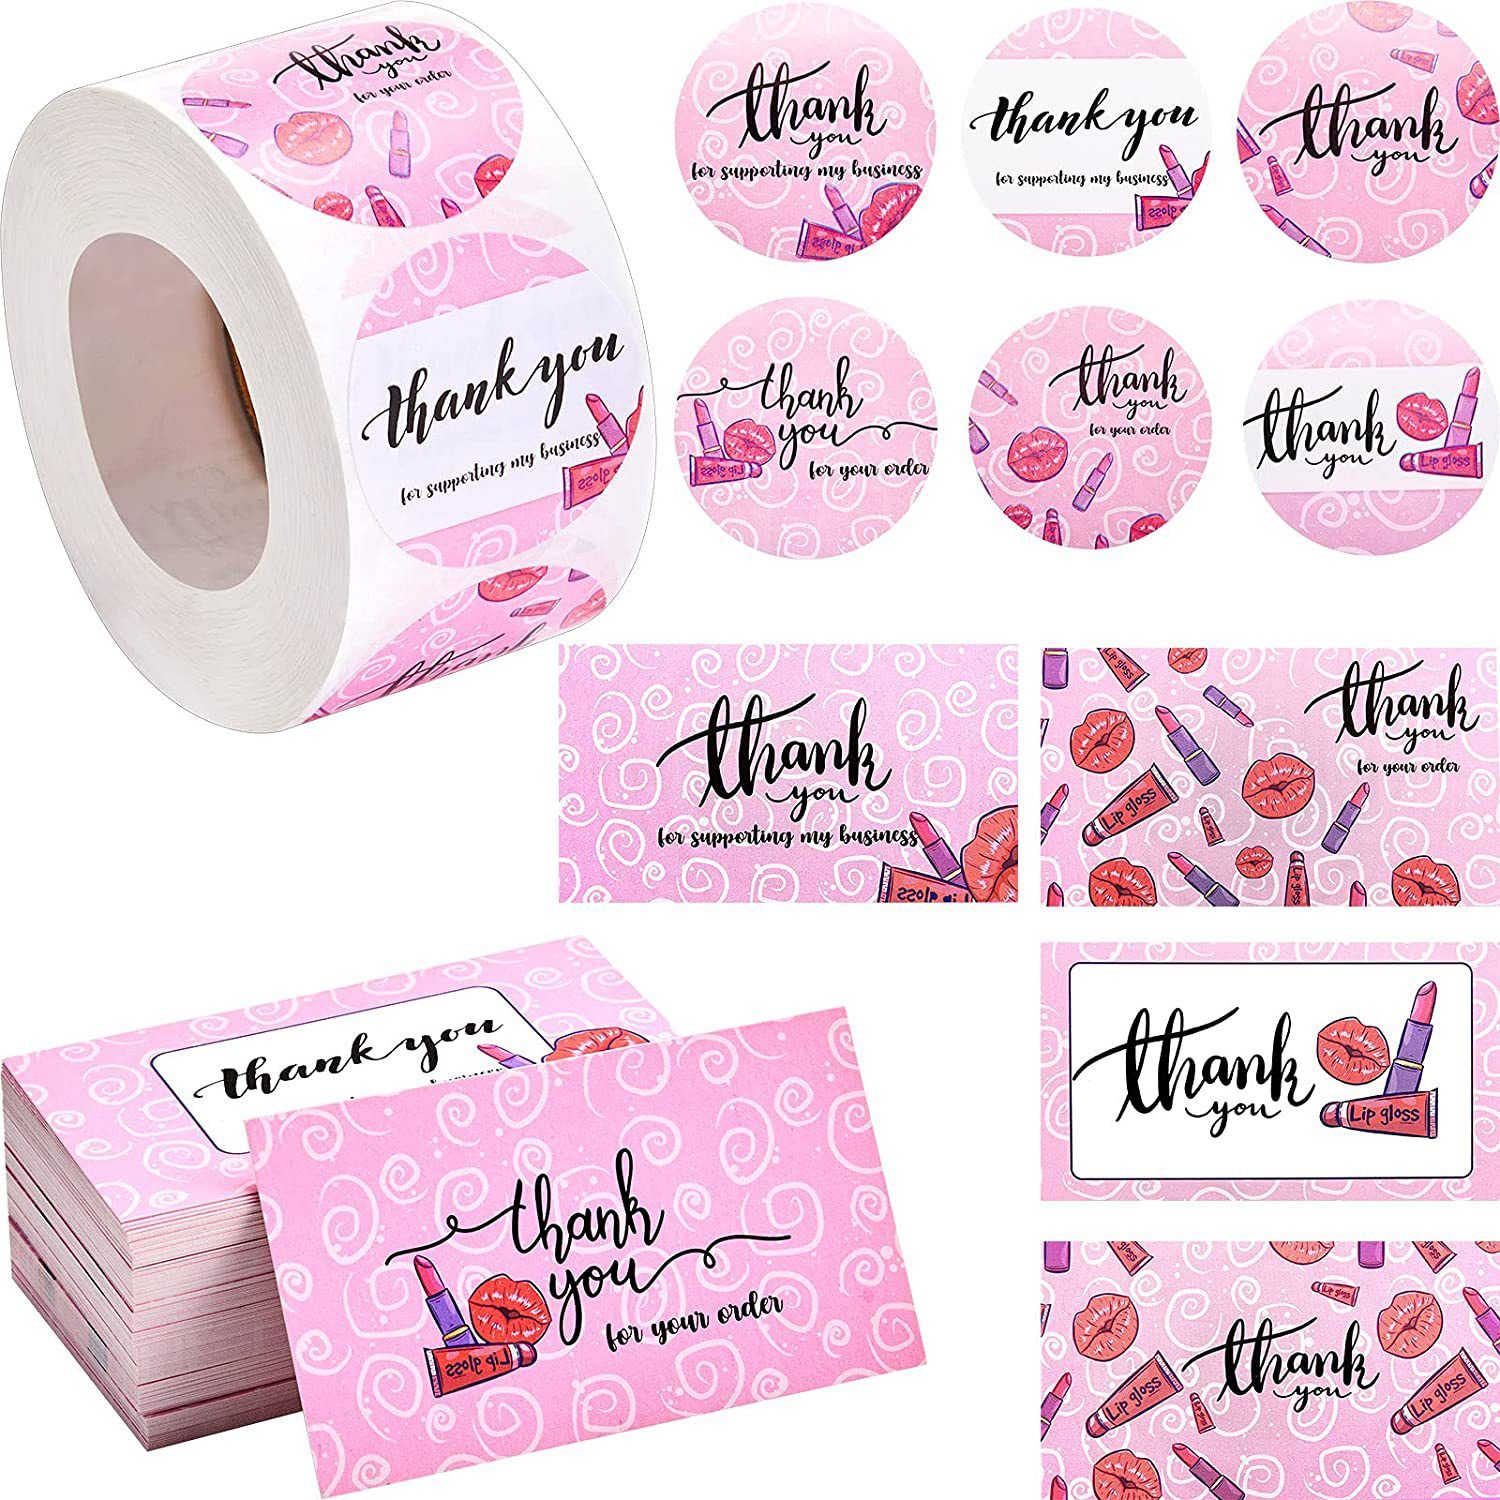 GUO 50/500PCS Party Supplies Paper Seal Label Candy Bags Thank You Stickers Label Stickers Thank You Card Thanks Greeting Cards